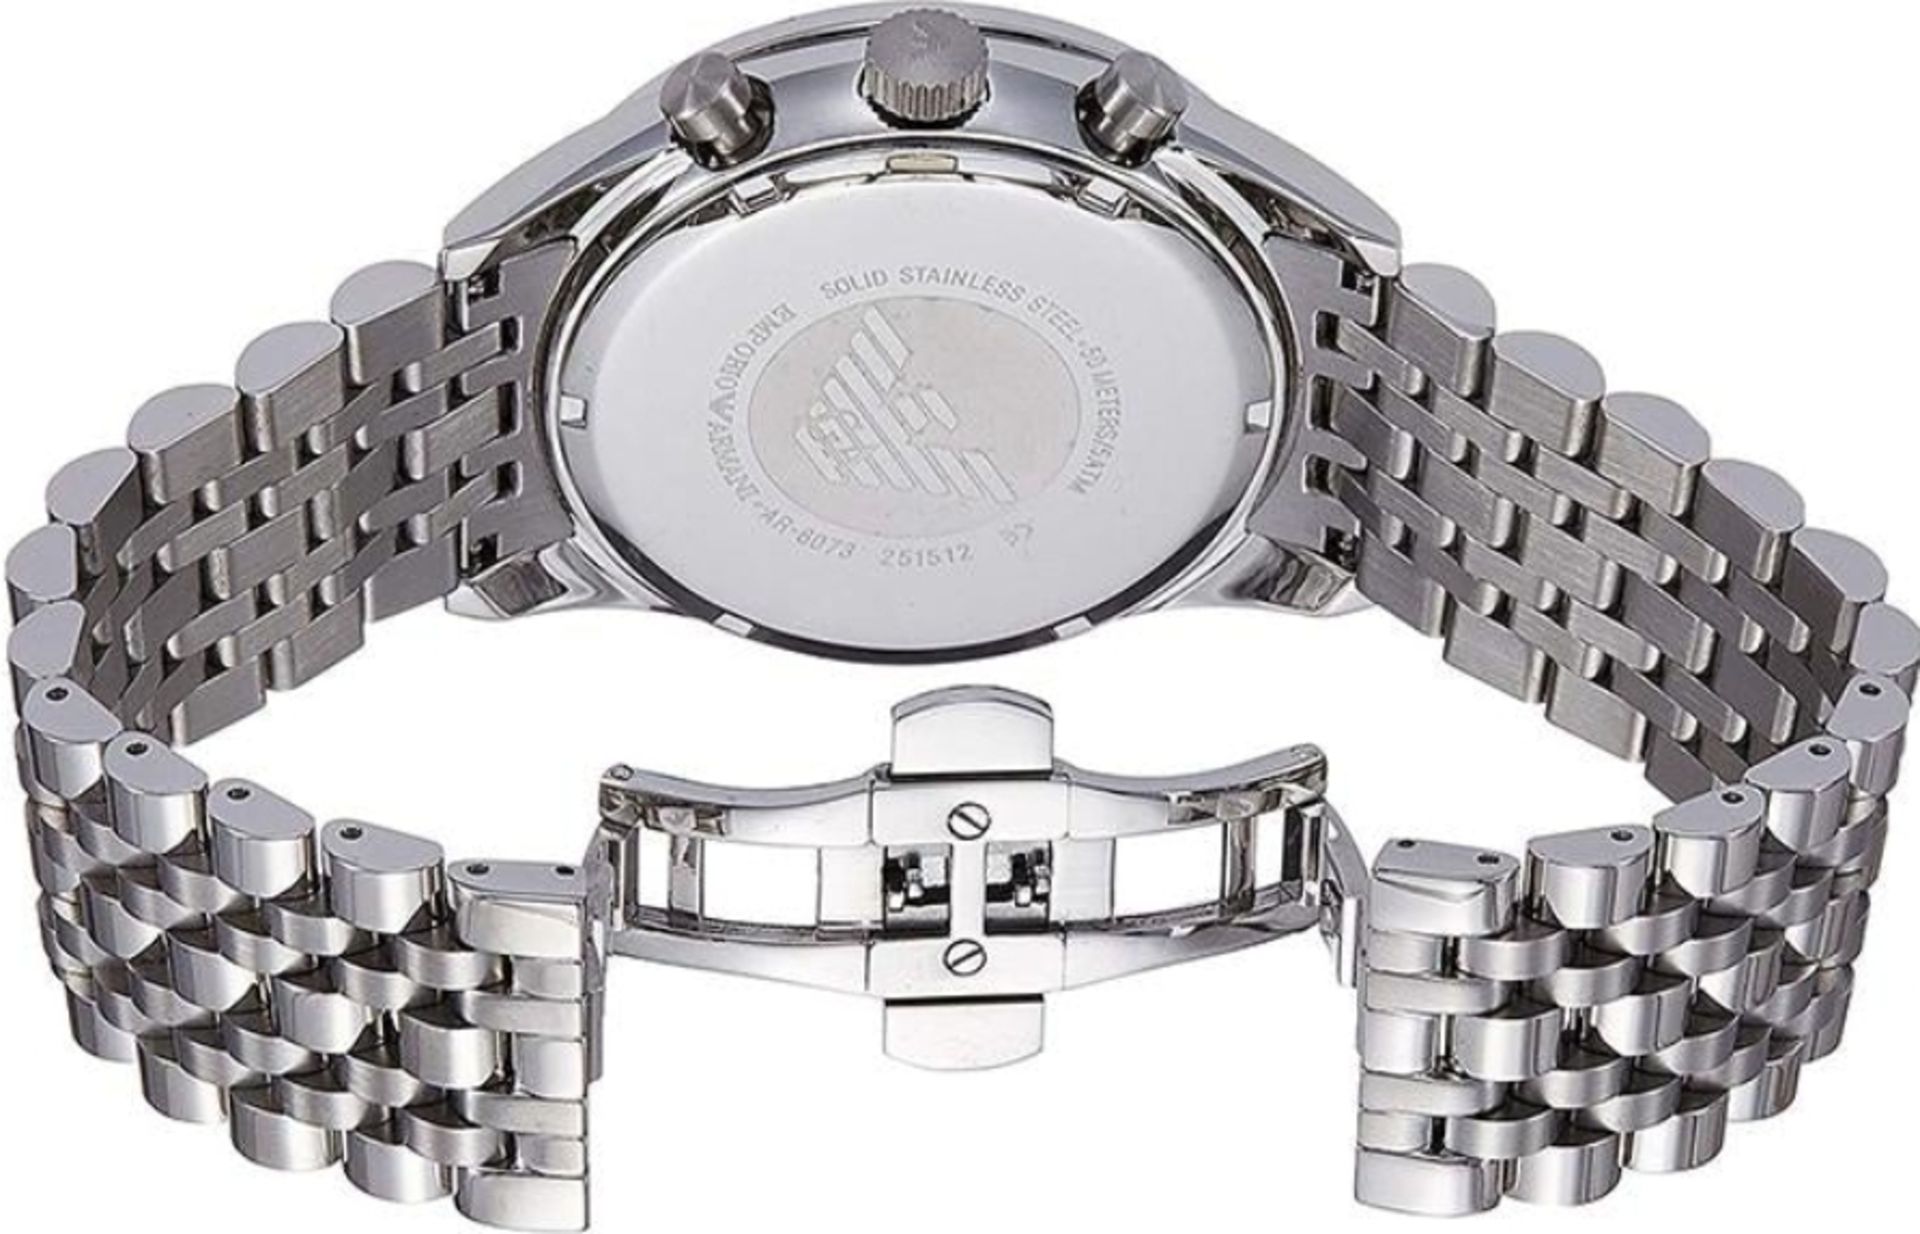 AR6073 Emporio Armani Men's Sportivo Silver Stainless Steel Chronograph Watch - Image 8 of 8